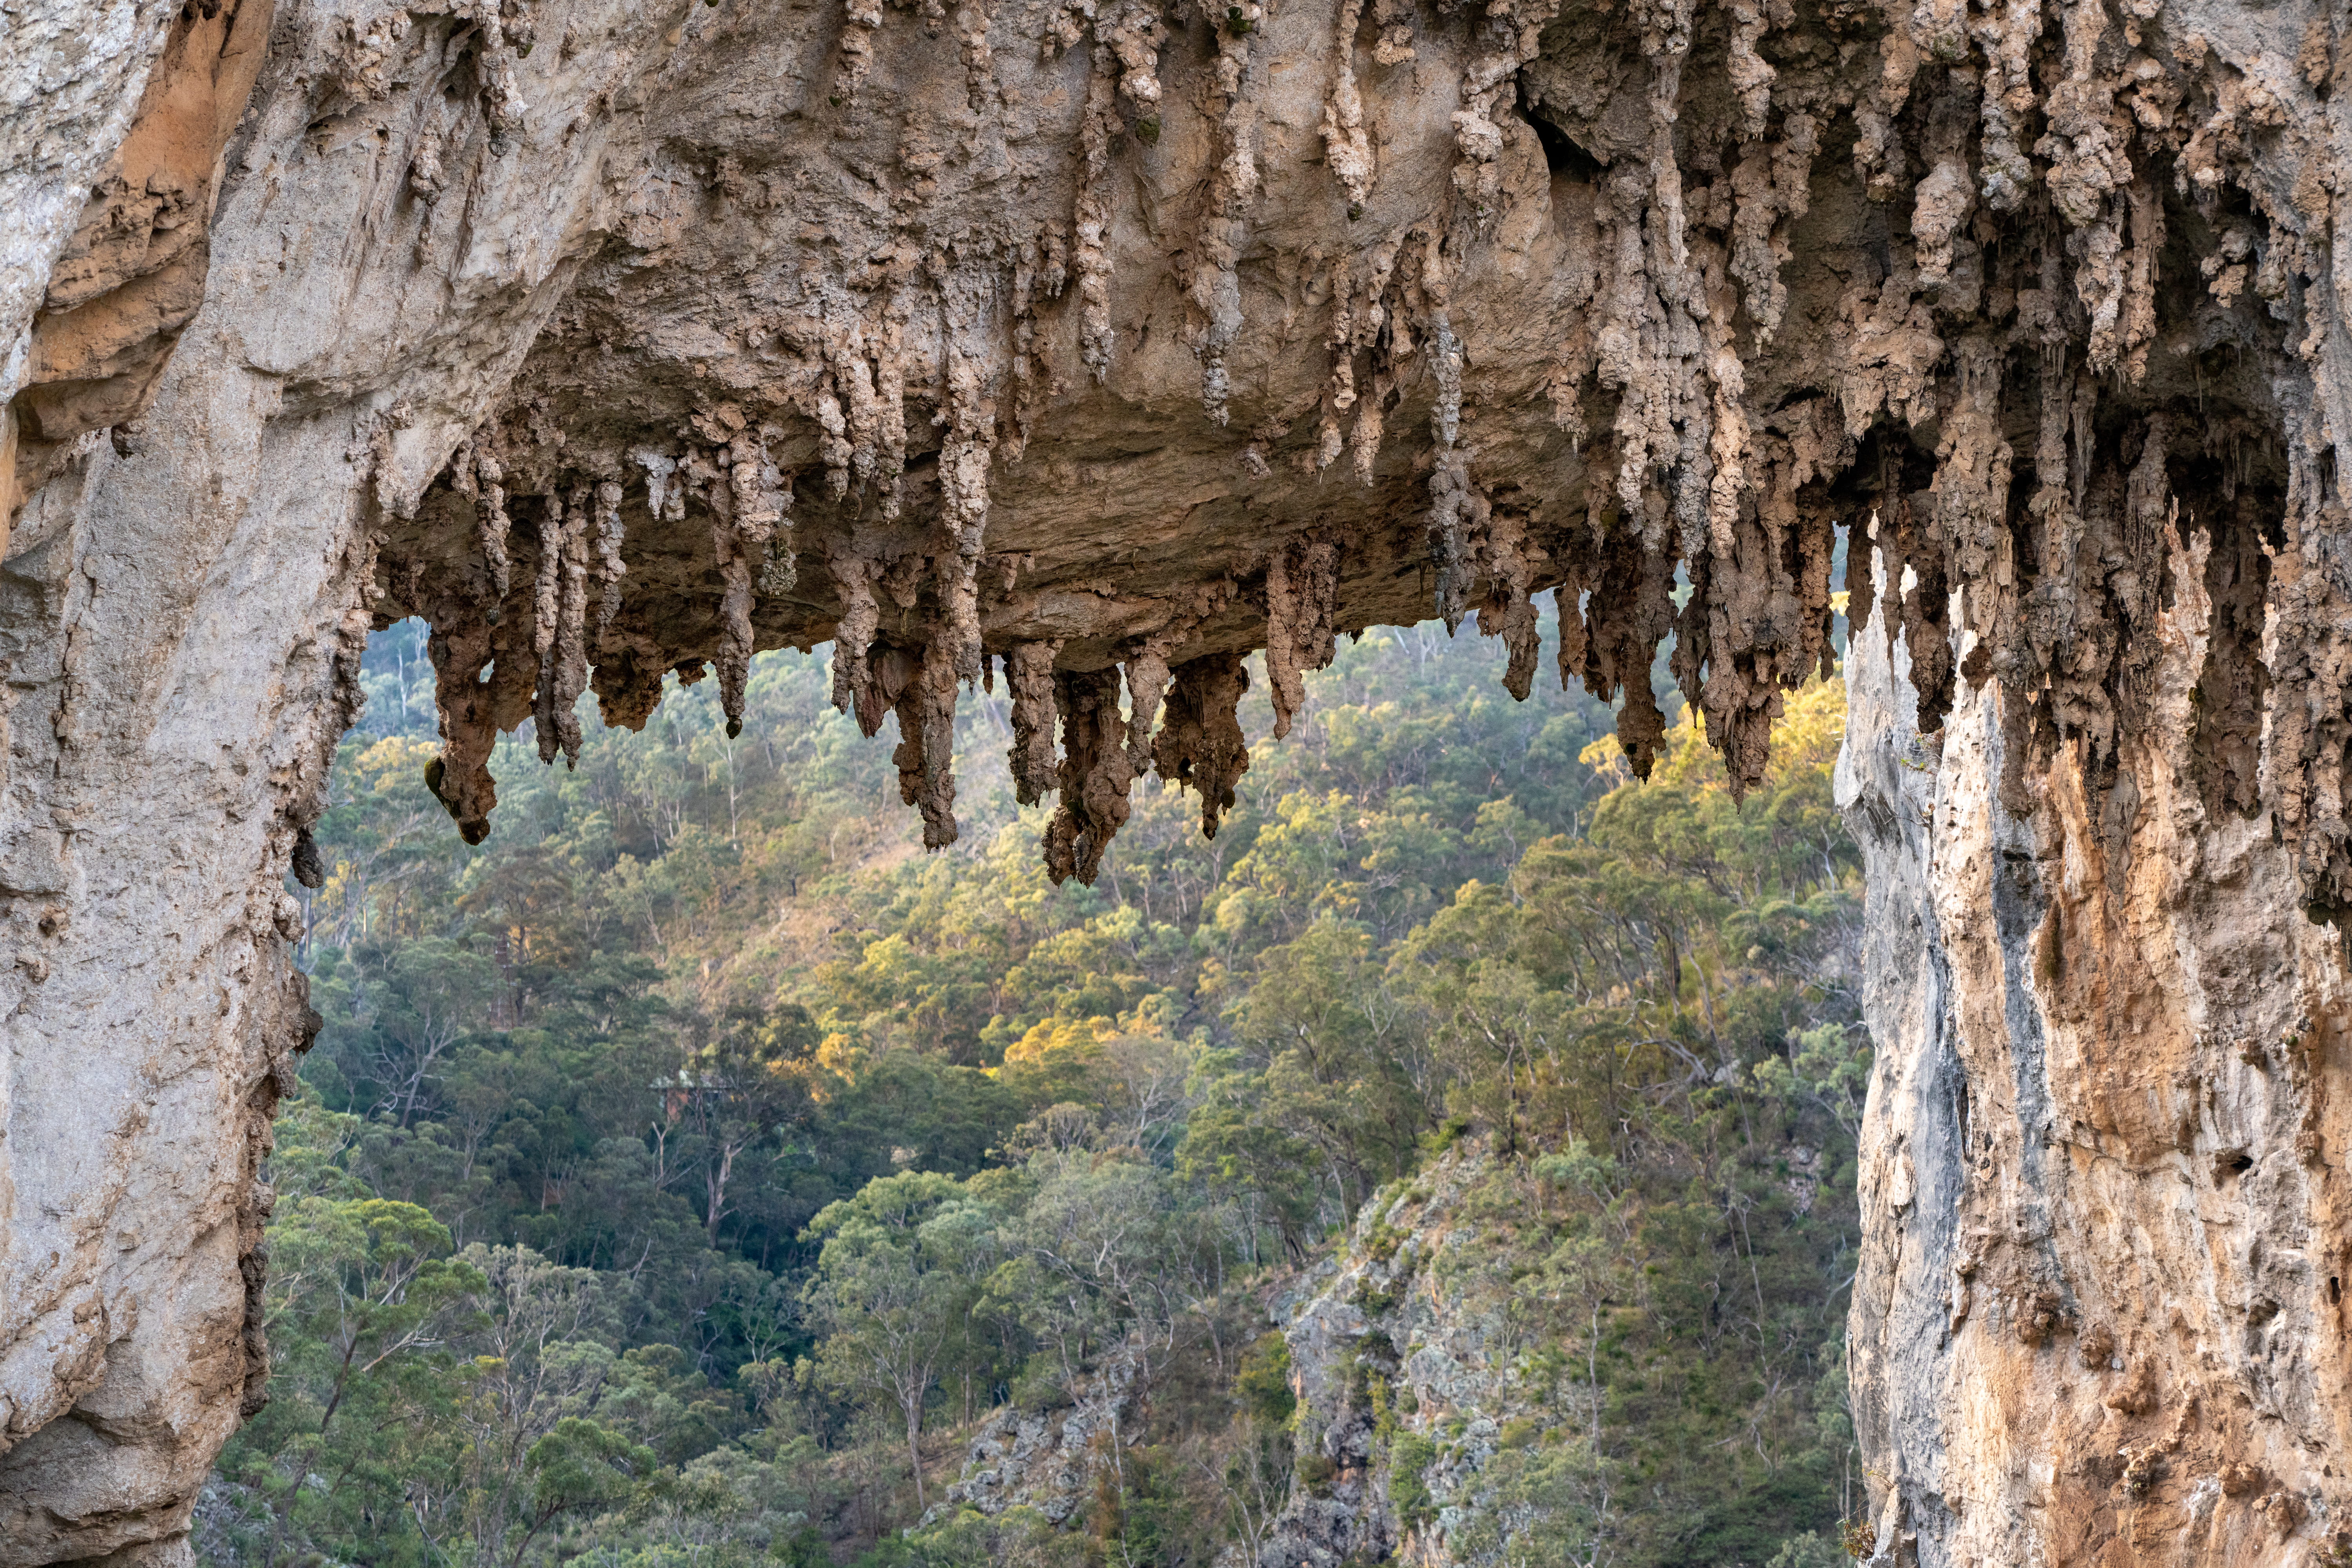 A close-up view of the bumpy rock formations of Carlotta Arch in Jenolan Karst Conservation Reserve. Photo: Jenolan Caves/DPE